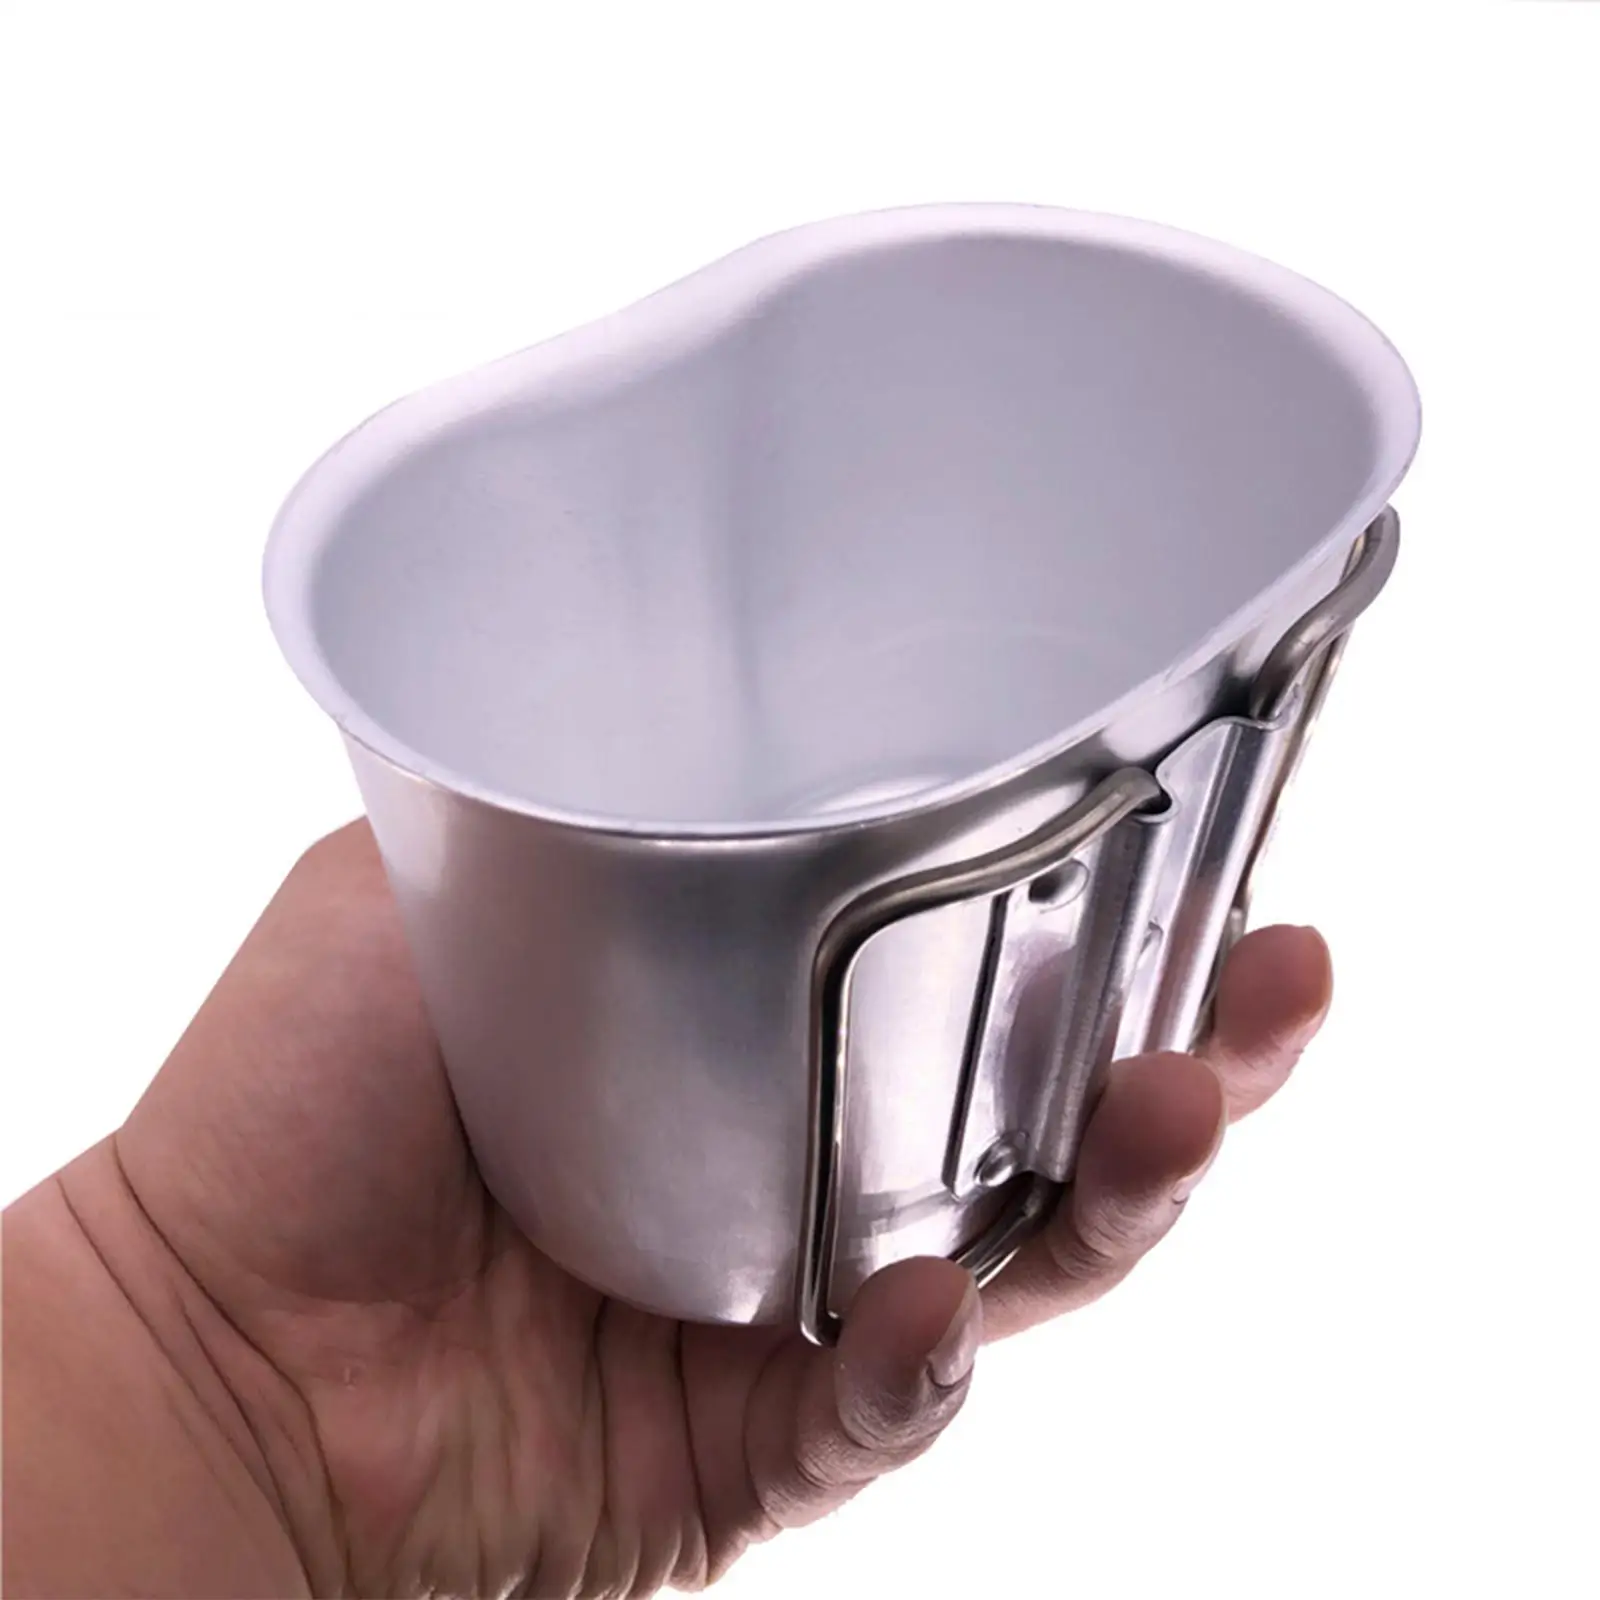 Multifunctional Camping Cookware Cup Lunchbox Foldable Teacup Reusable Durable Container 600ml Food Containe for Travel Picnic